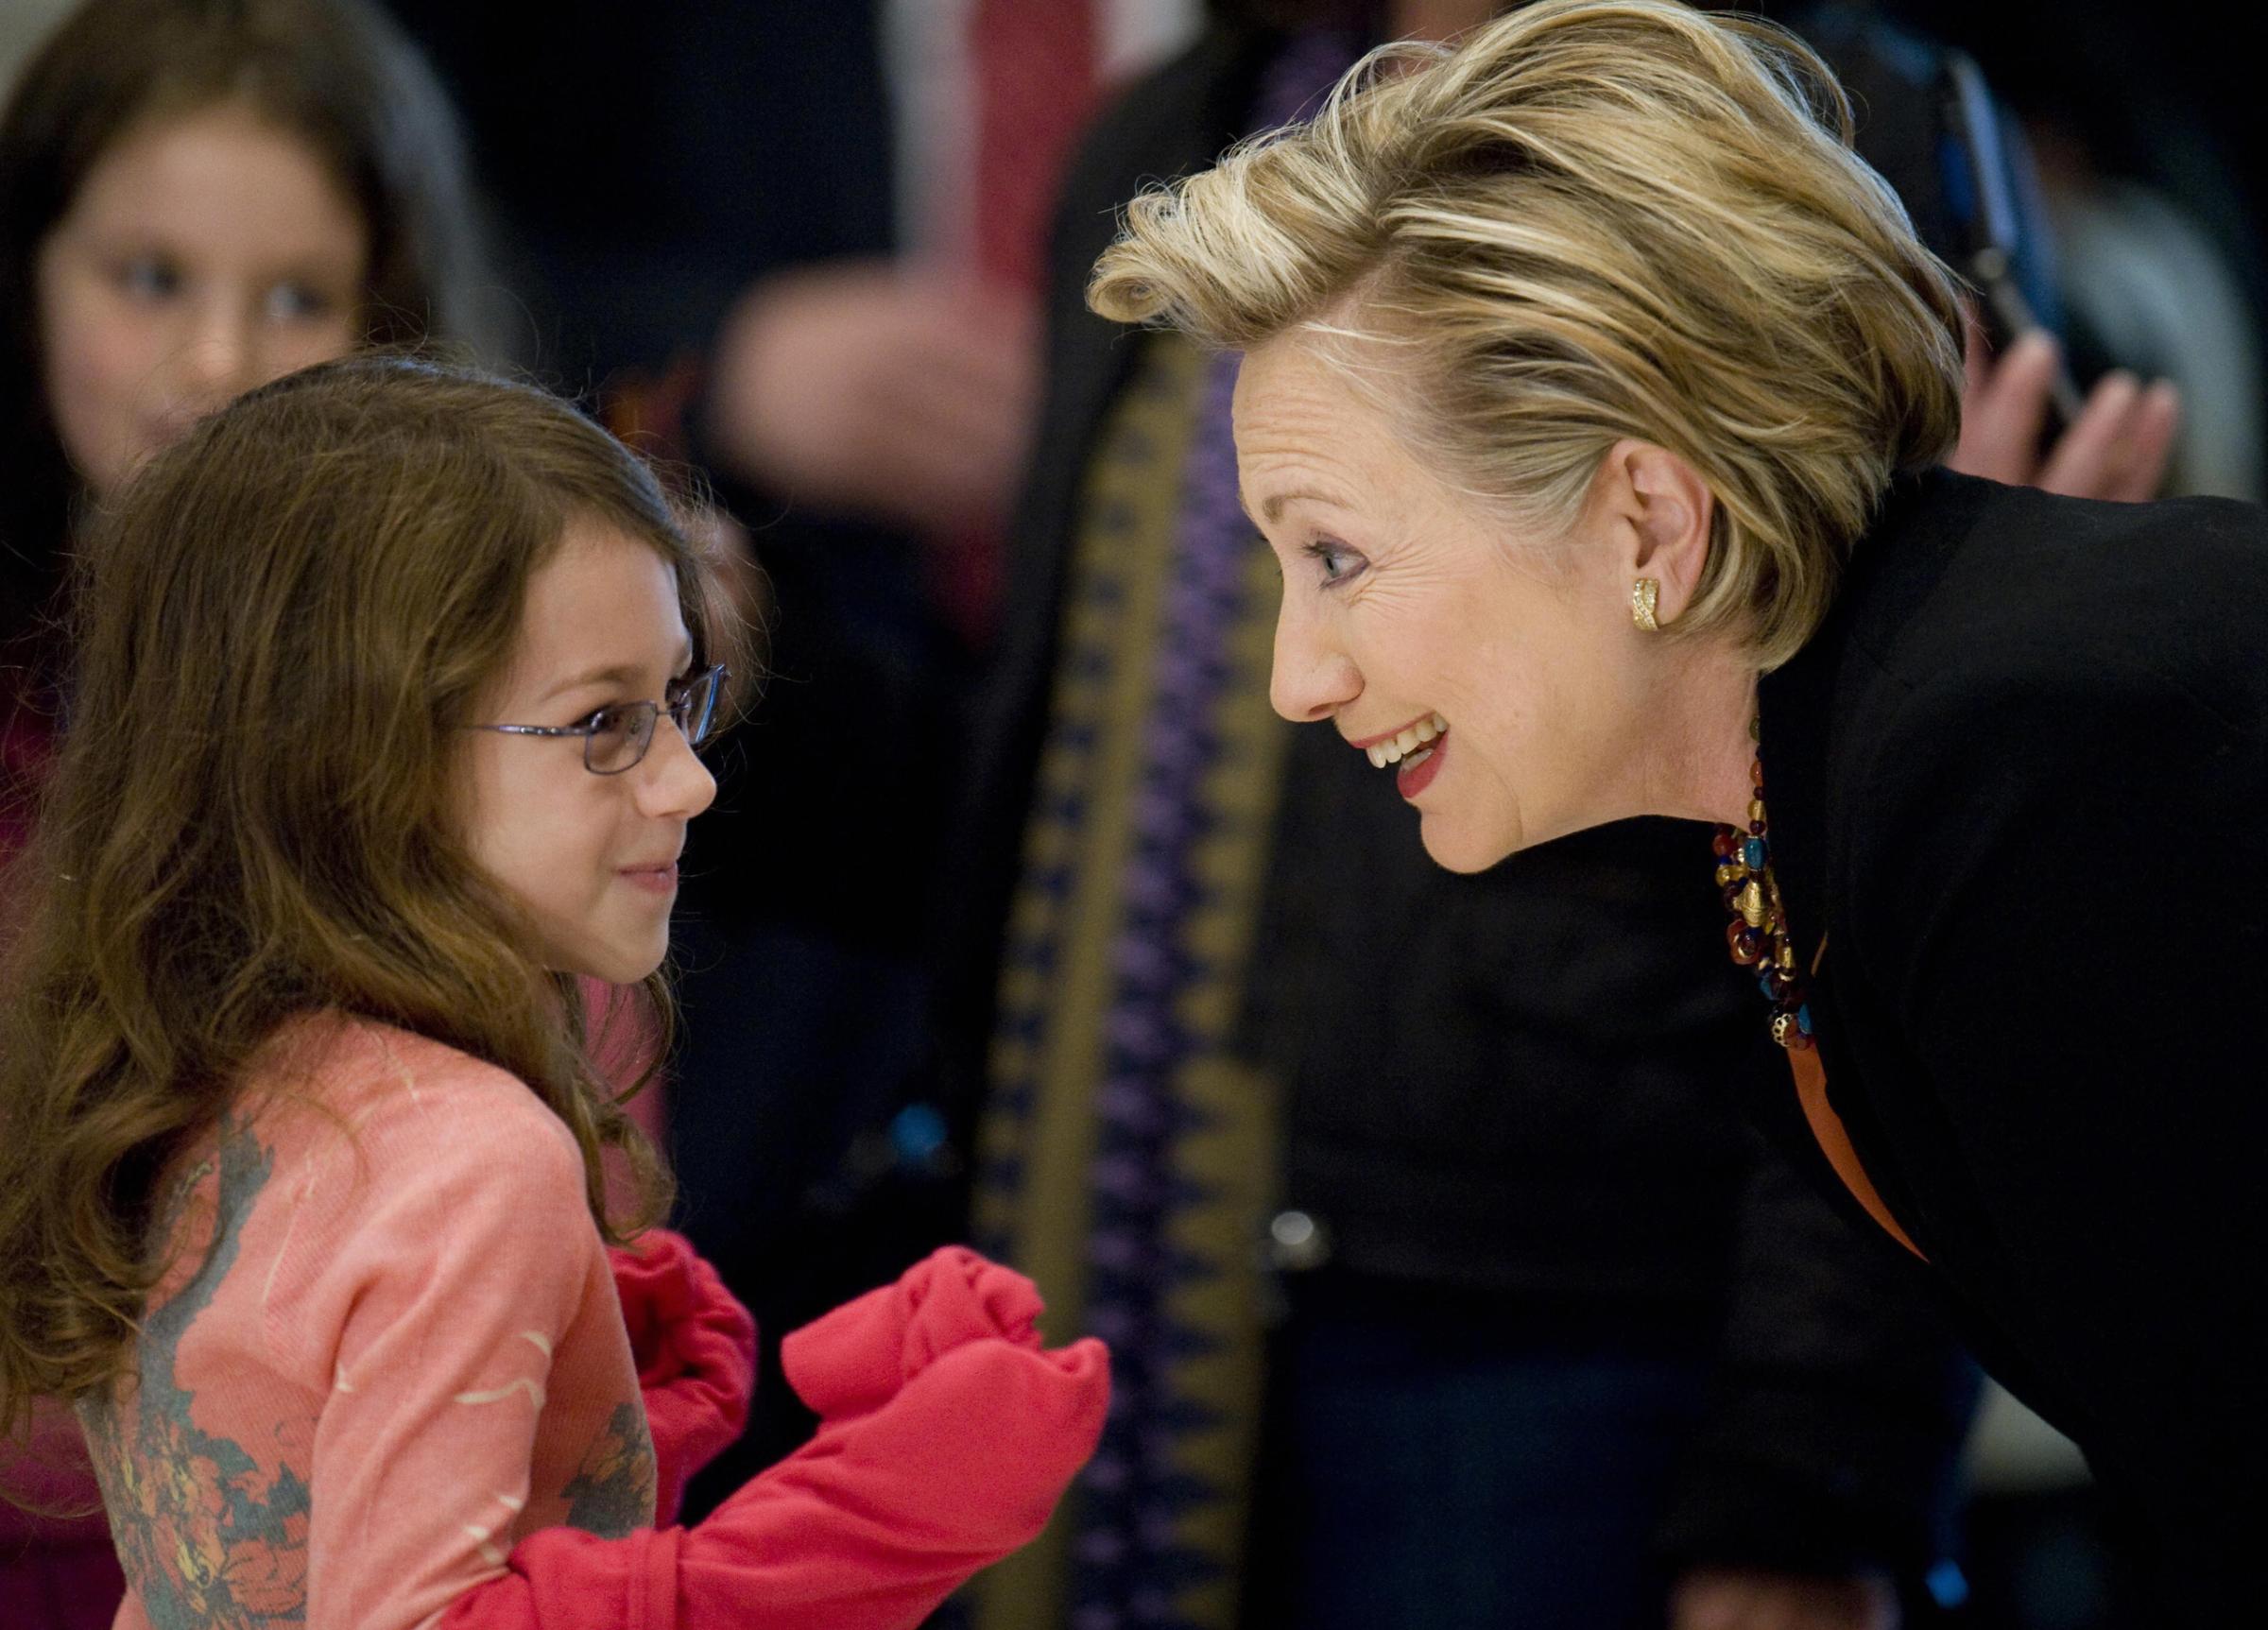 Hillary Clinton talks to a little girl at her polling station before voting in the 2008 Presidential Election in Chappaqua, New York, on Nov. 4, 2008.